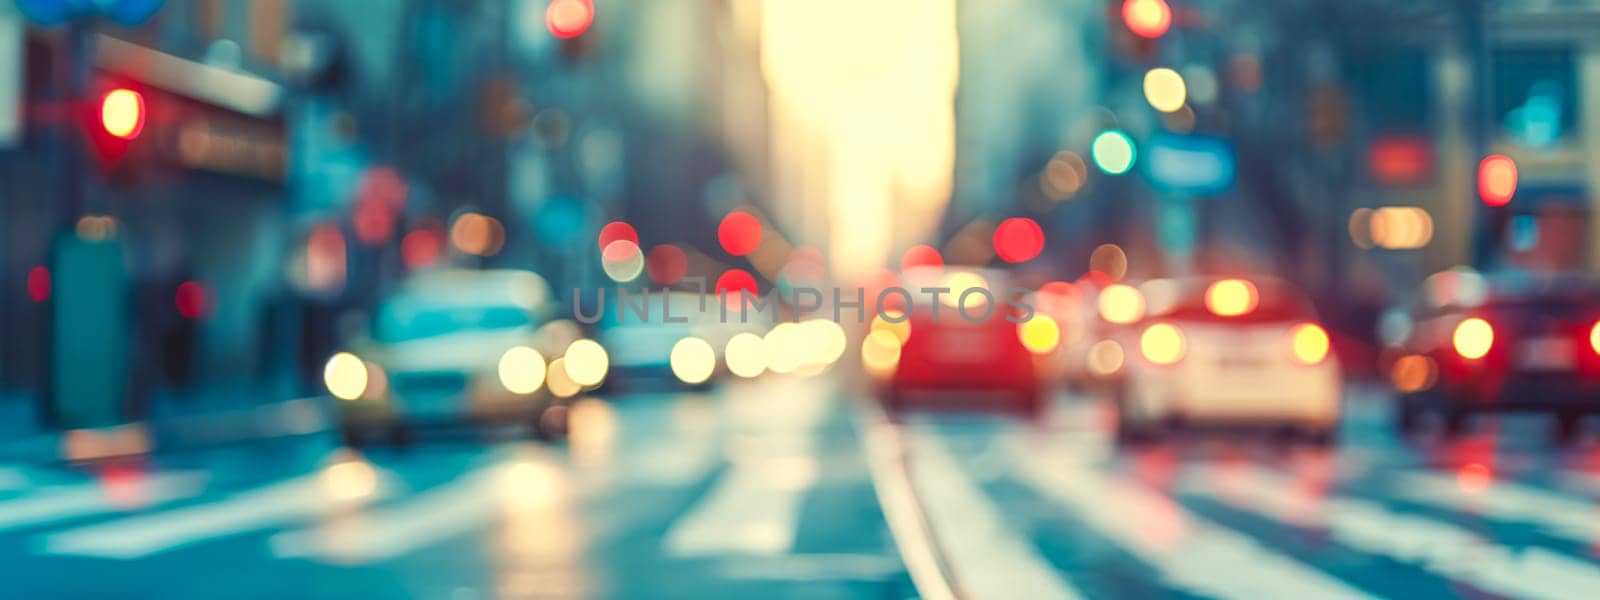 blurred city street scene with bokeh lights from traffic signals and cars, creating an urban atmosphere. banner with copy space